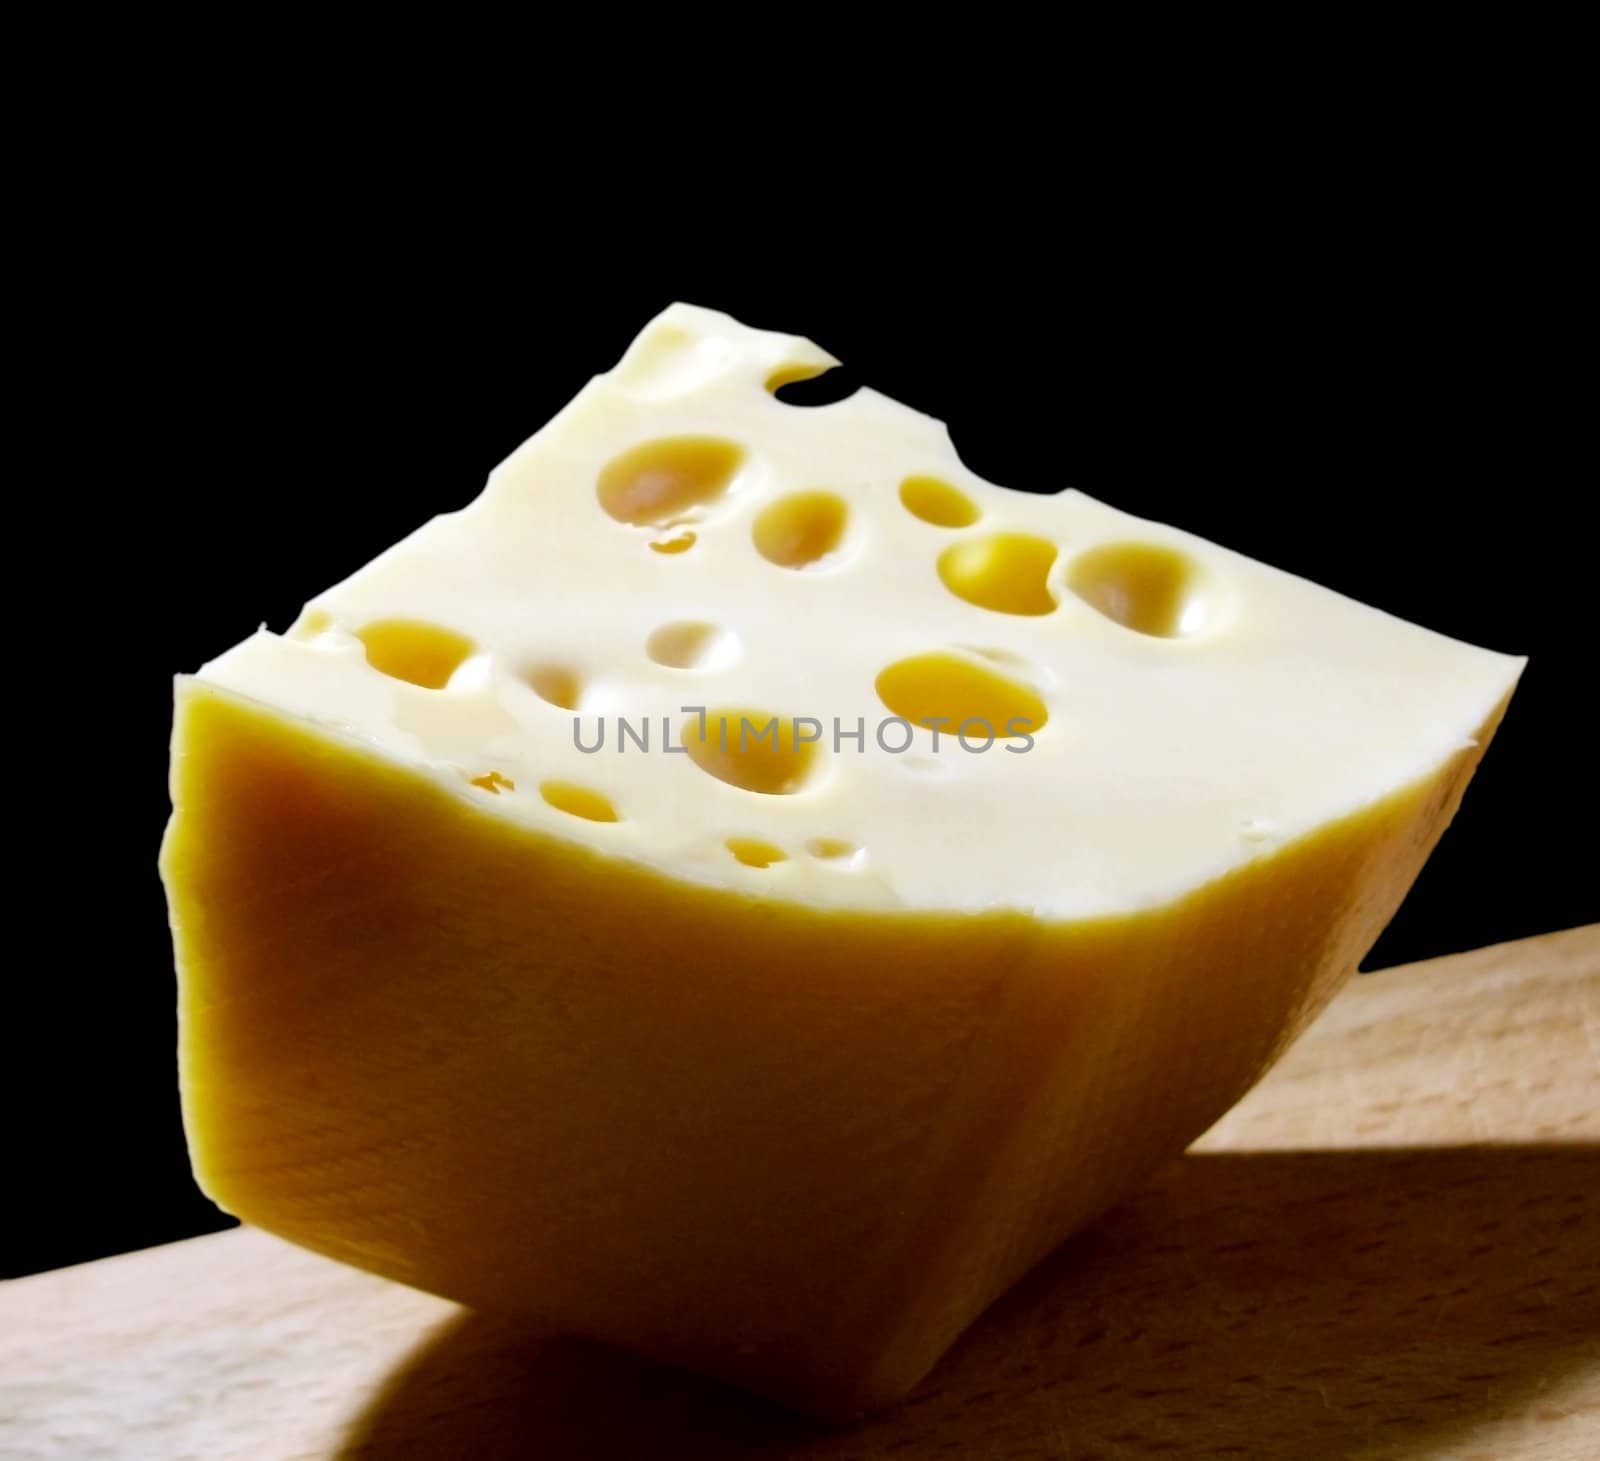 piece of cheese on cutting board